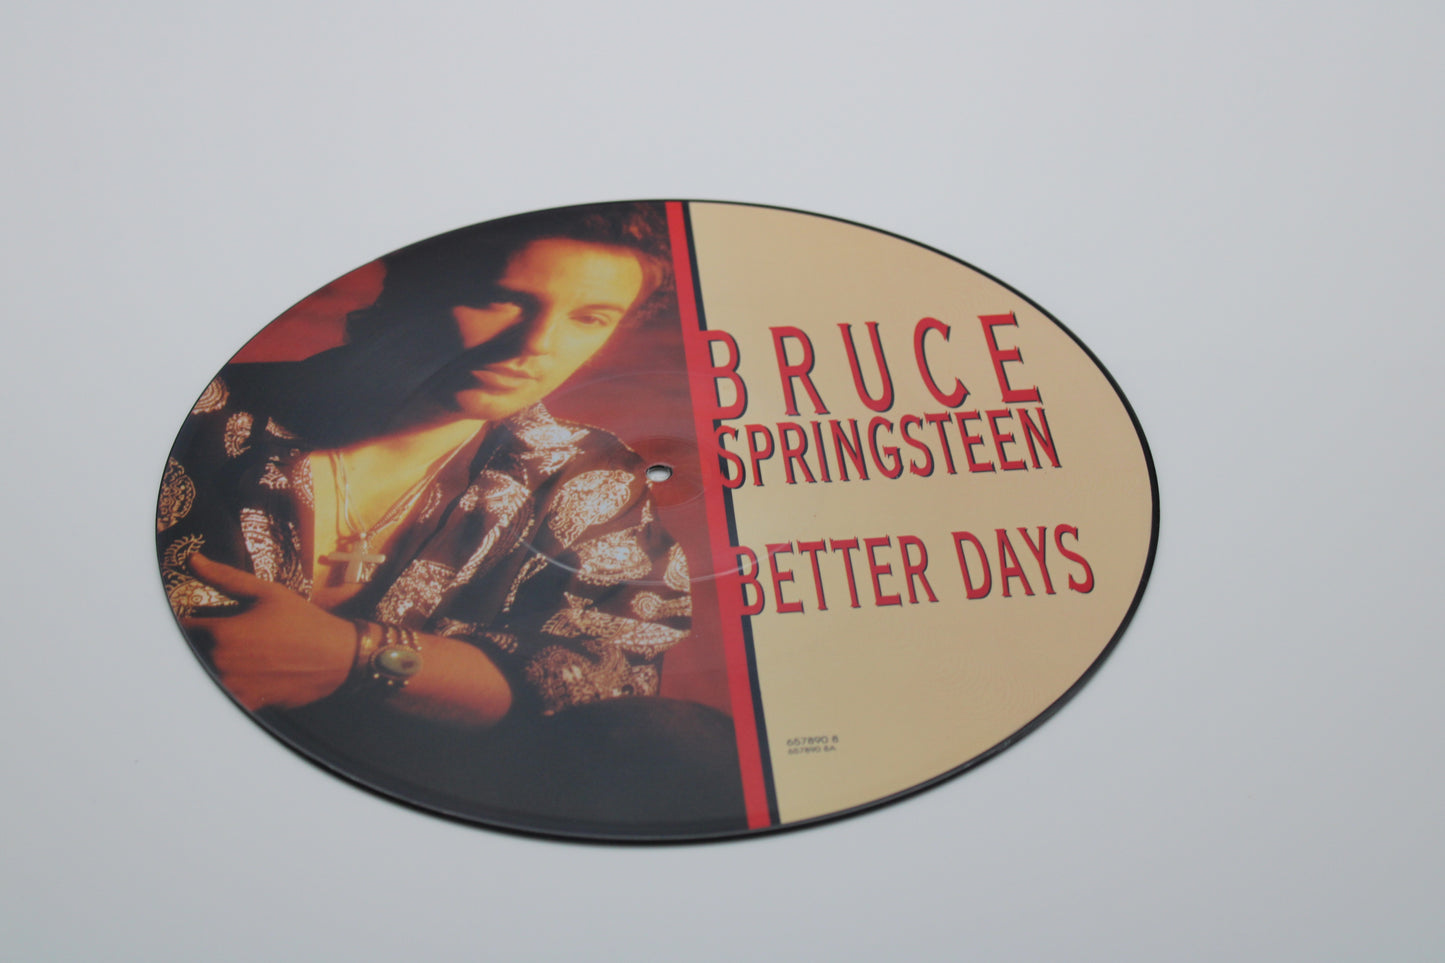 Bruce Springsteen Better Days 12” Picture Disc Vinyl - Import Collectible